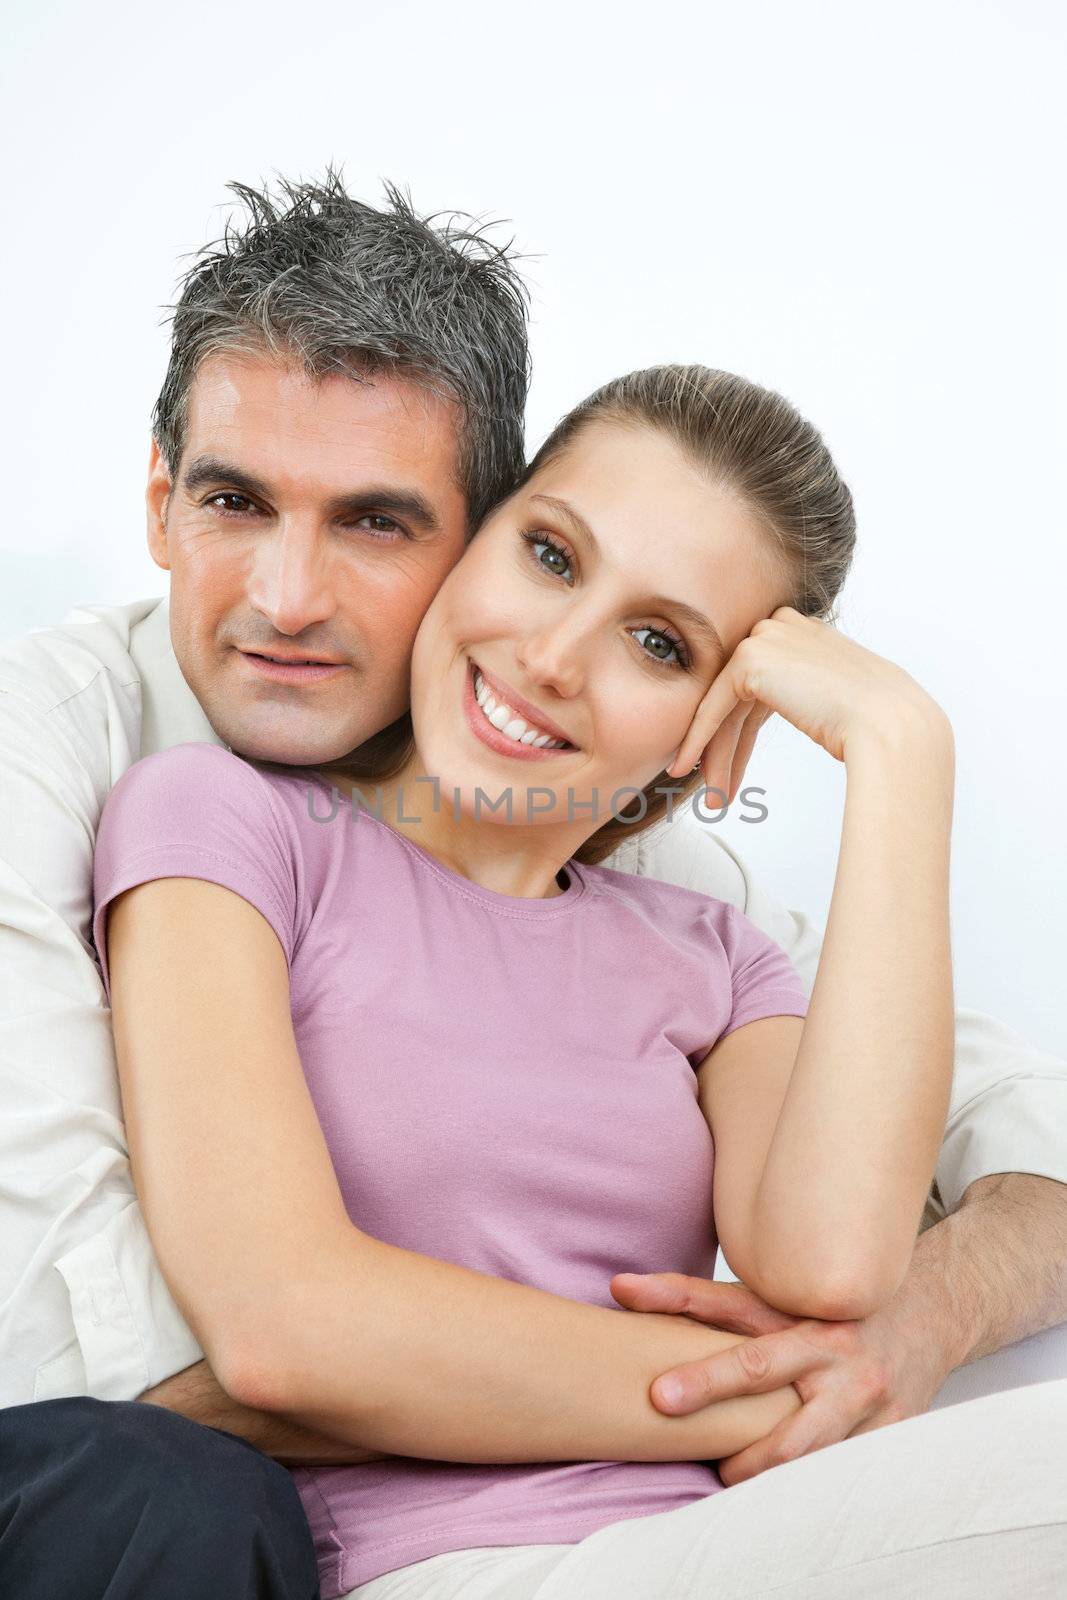 Portrait of an affectionate couple embracing over white background